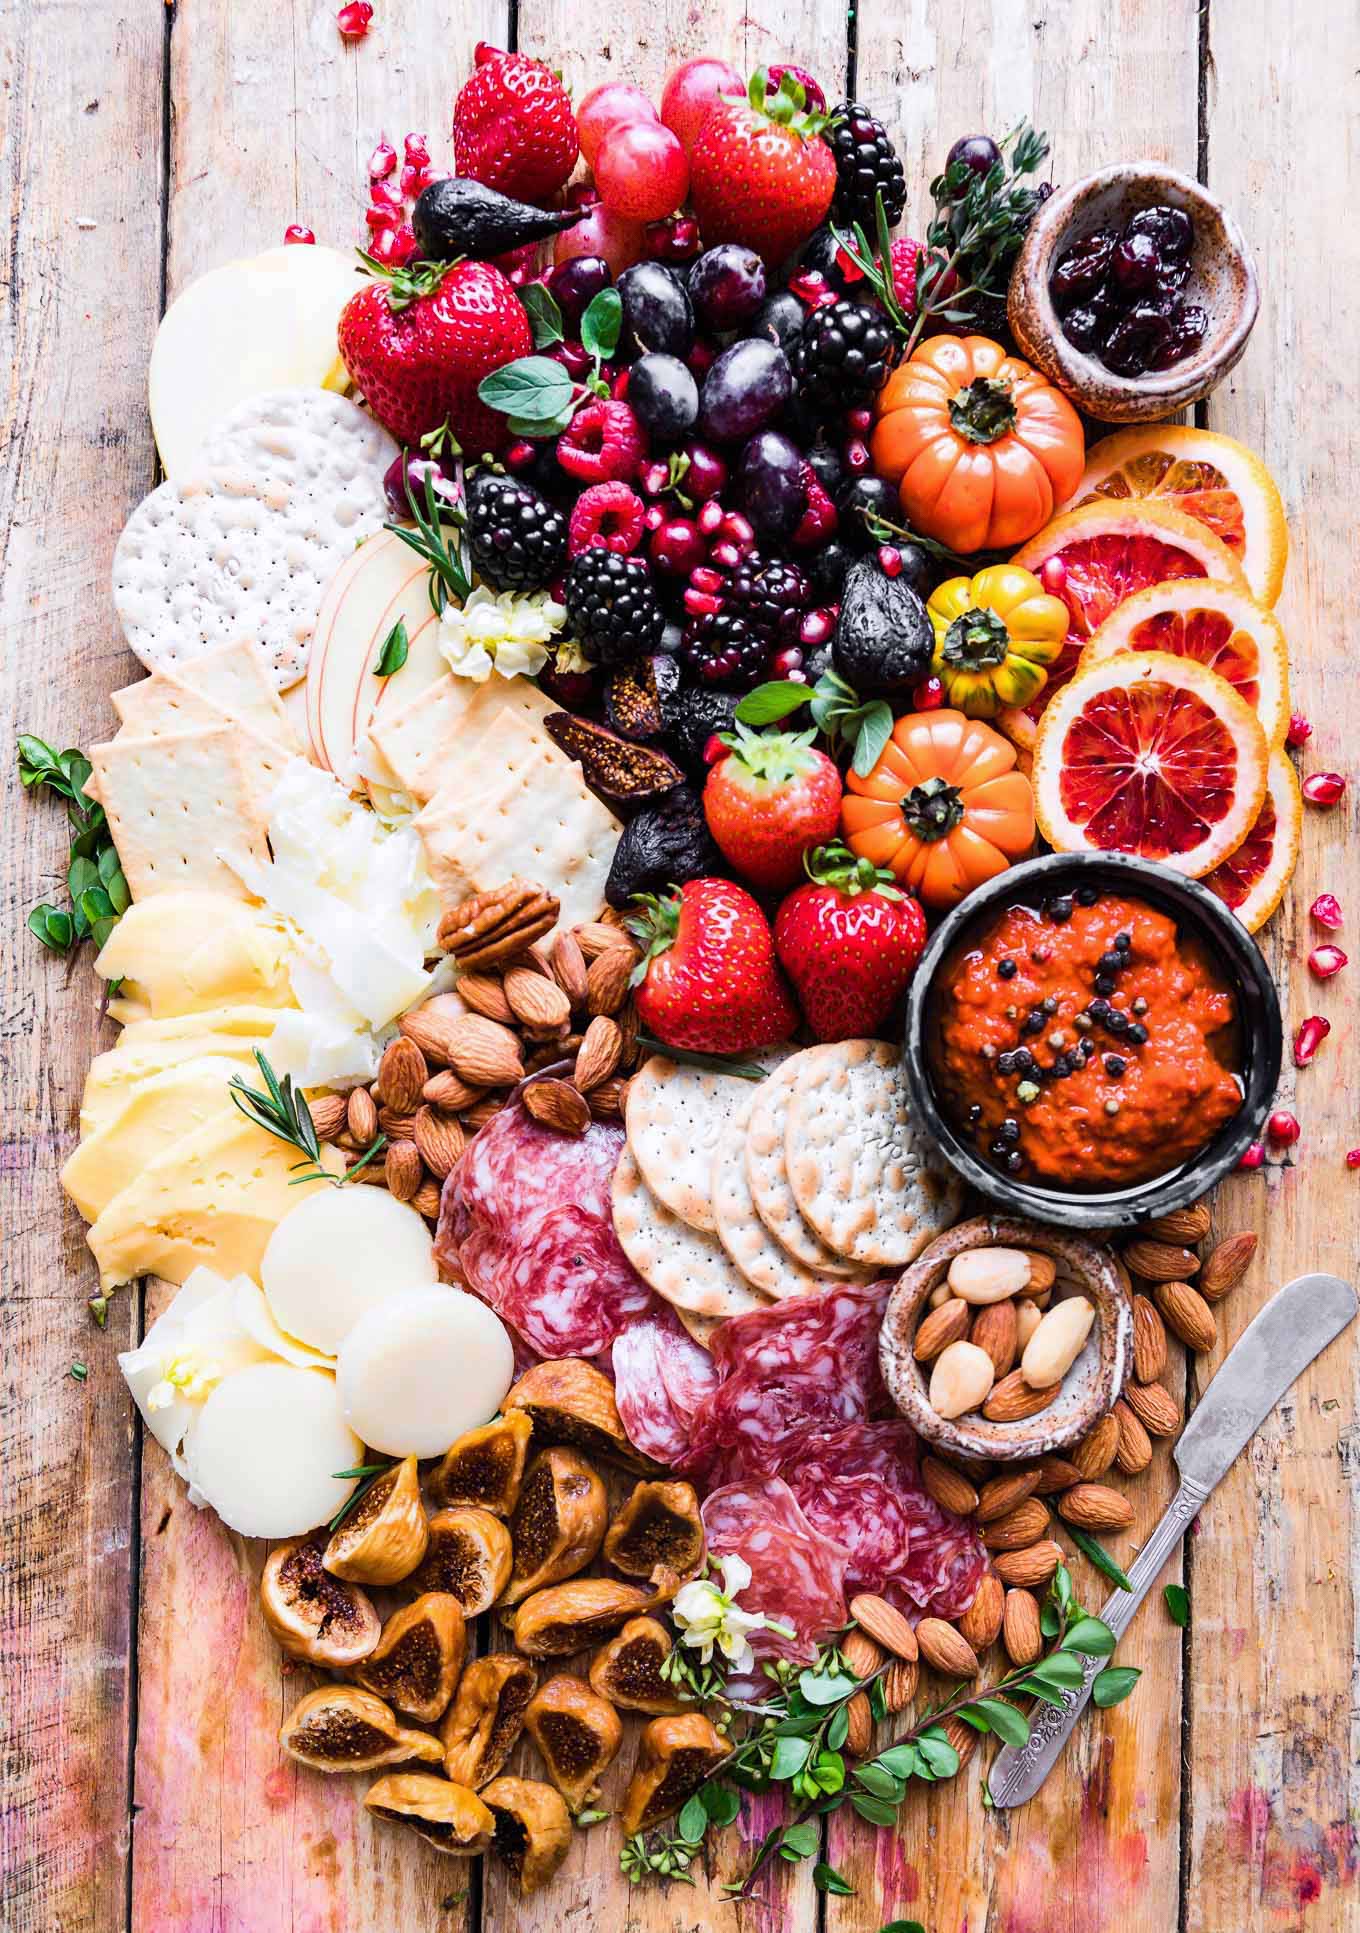 Festive Easy cheese board platter with berries, cheese, crackers, dried meat, nuts, dip, figs, and berries